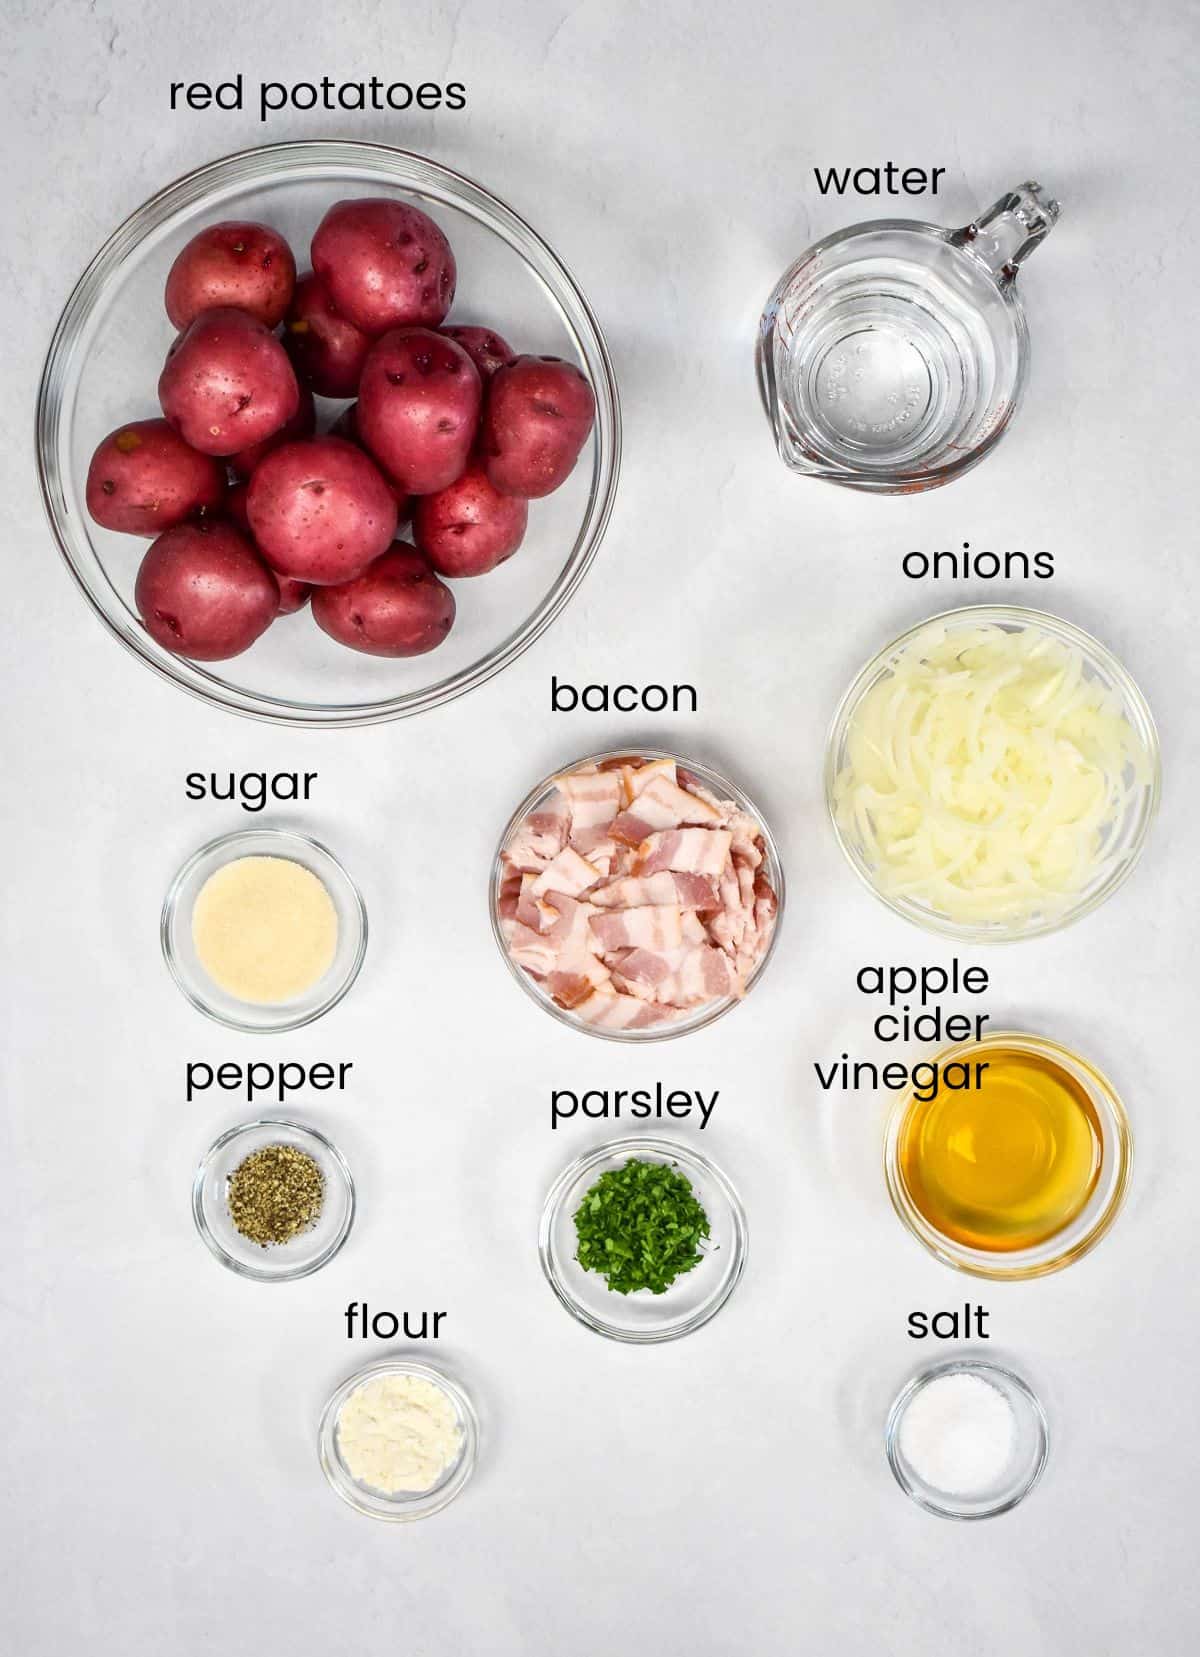 The ingredients for the warm potato salad arranged in glass bowls on a white table. Each ingredient is labeled with small black letters.